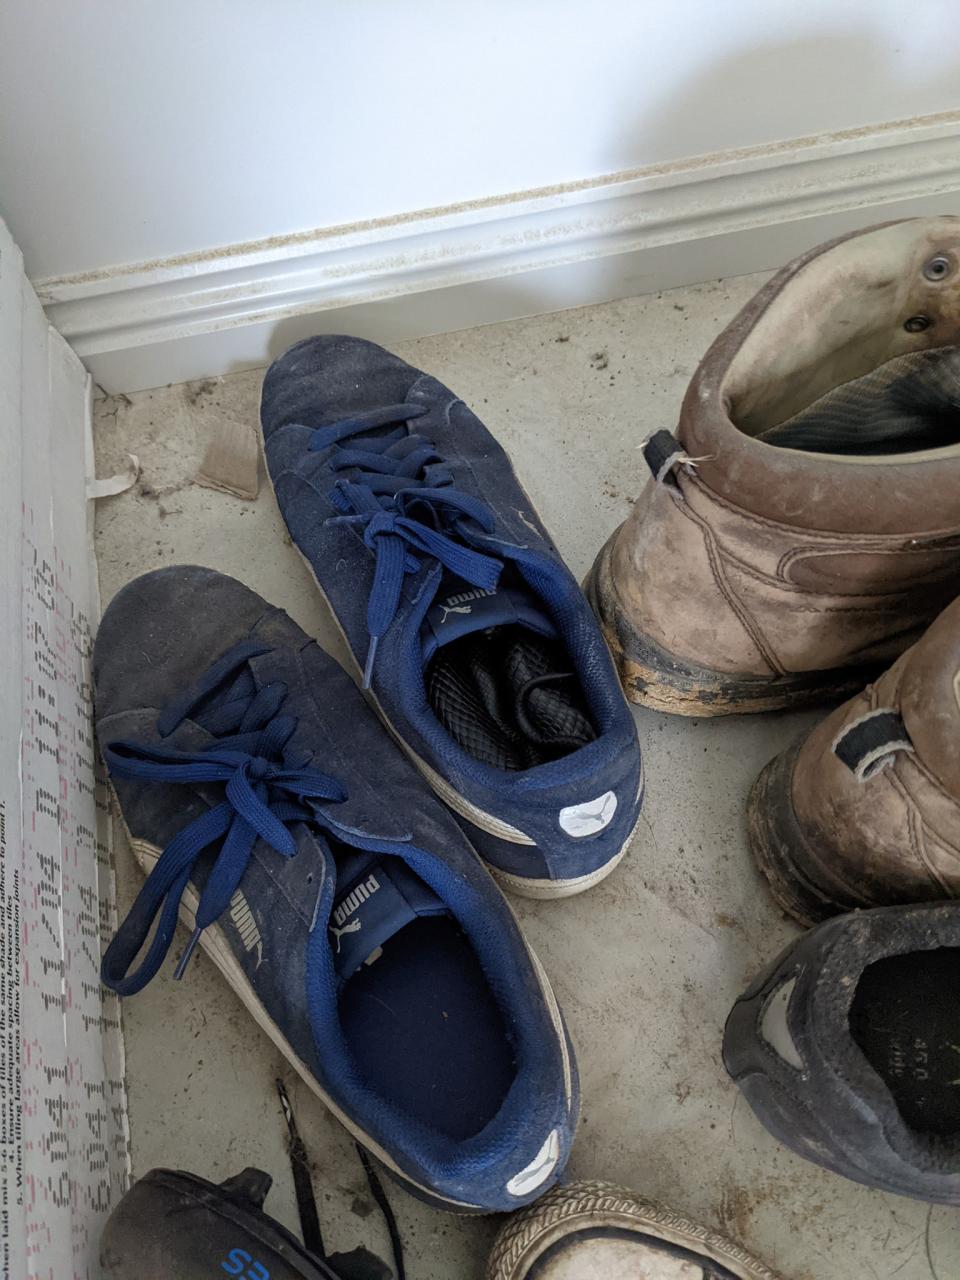 A pair of royal blue Puma sneakers on the ground outside. A black snake can be seen curled up inside the shoe on the right.